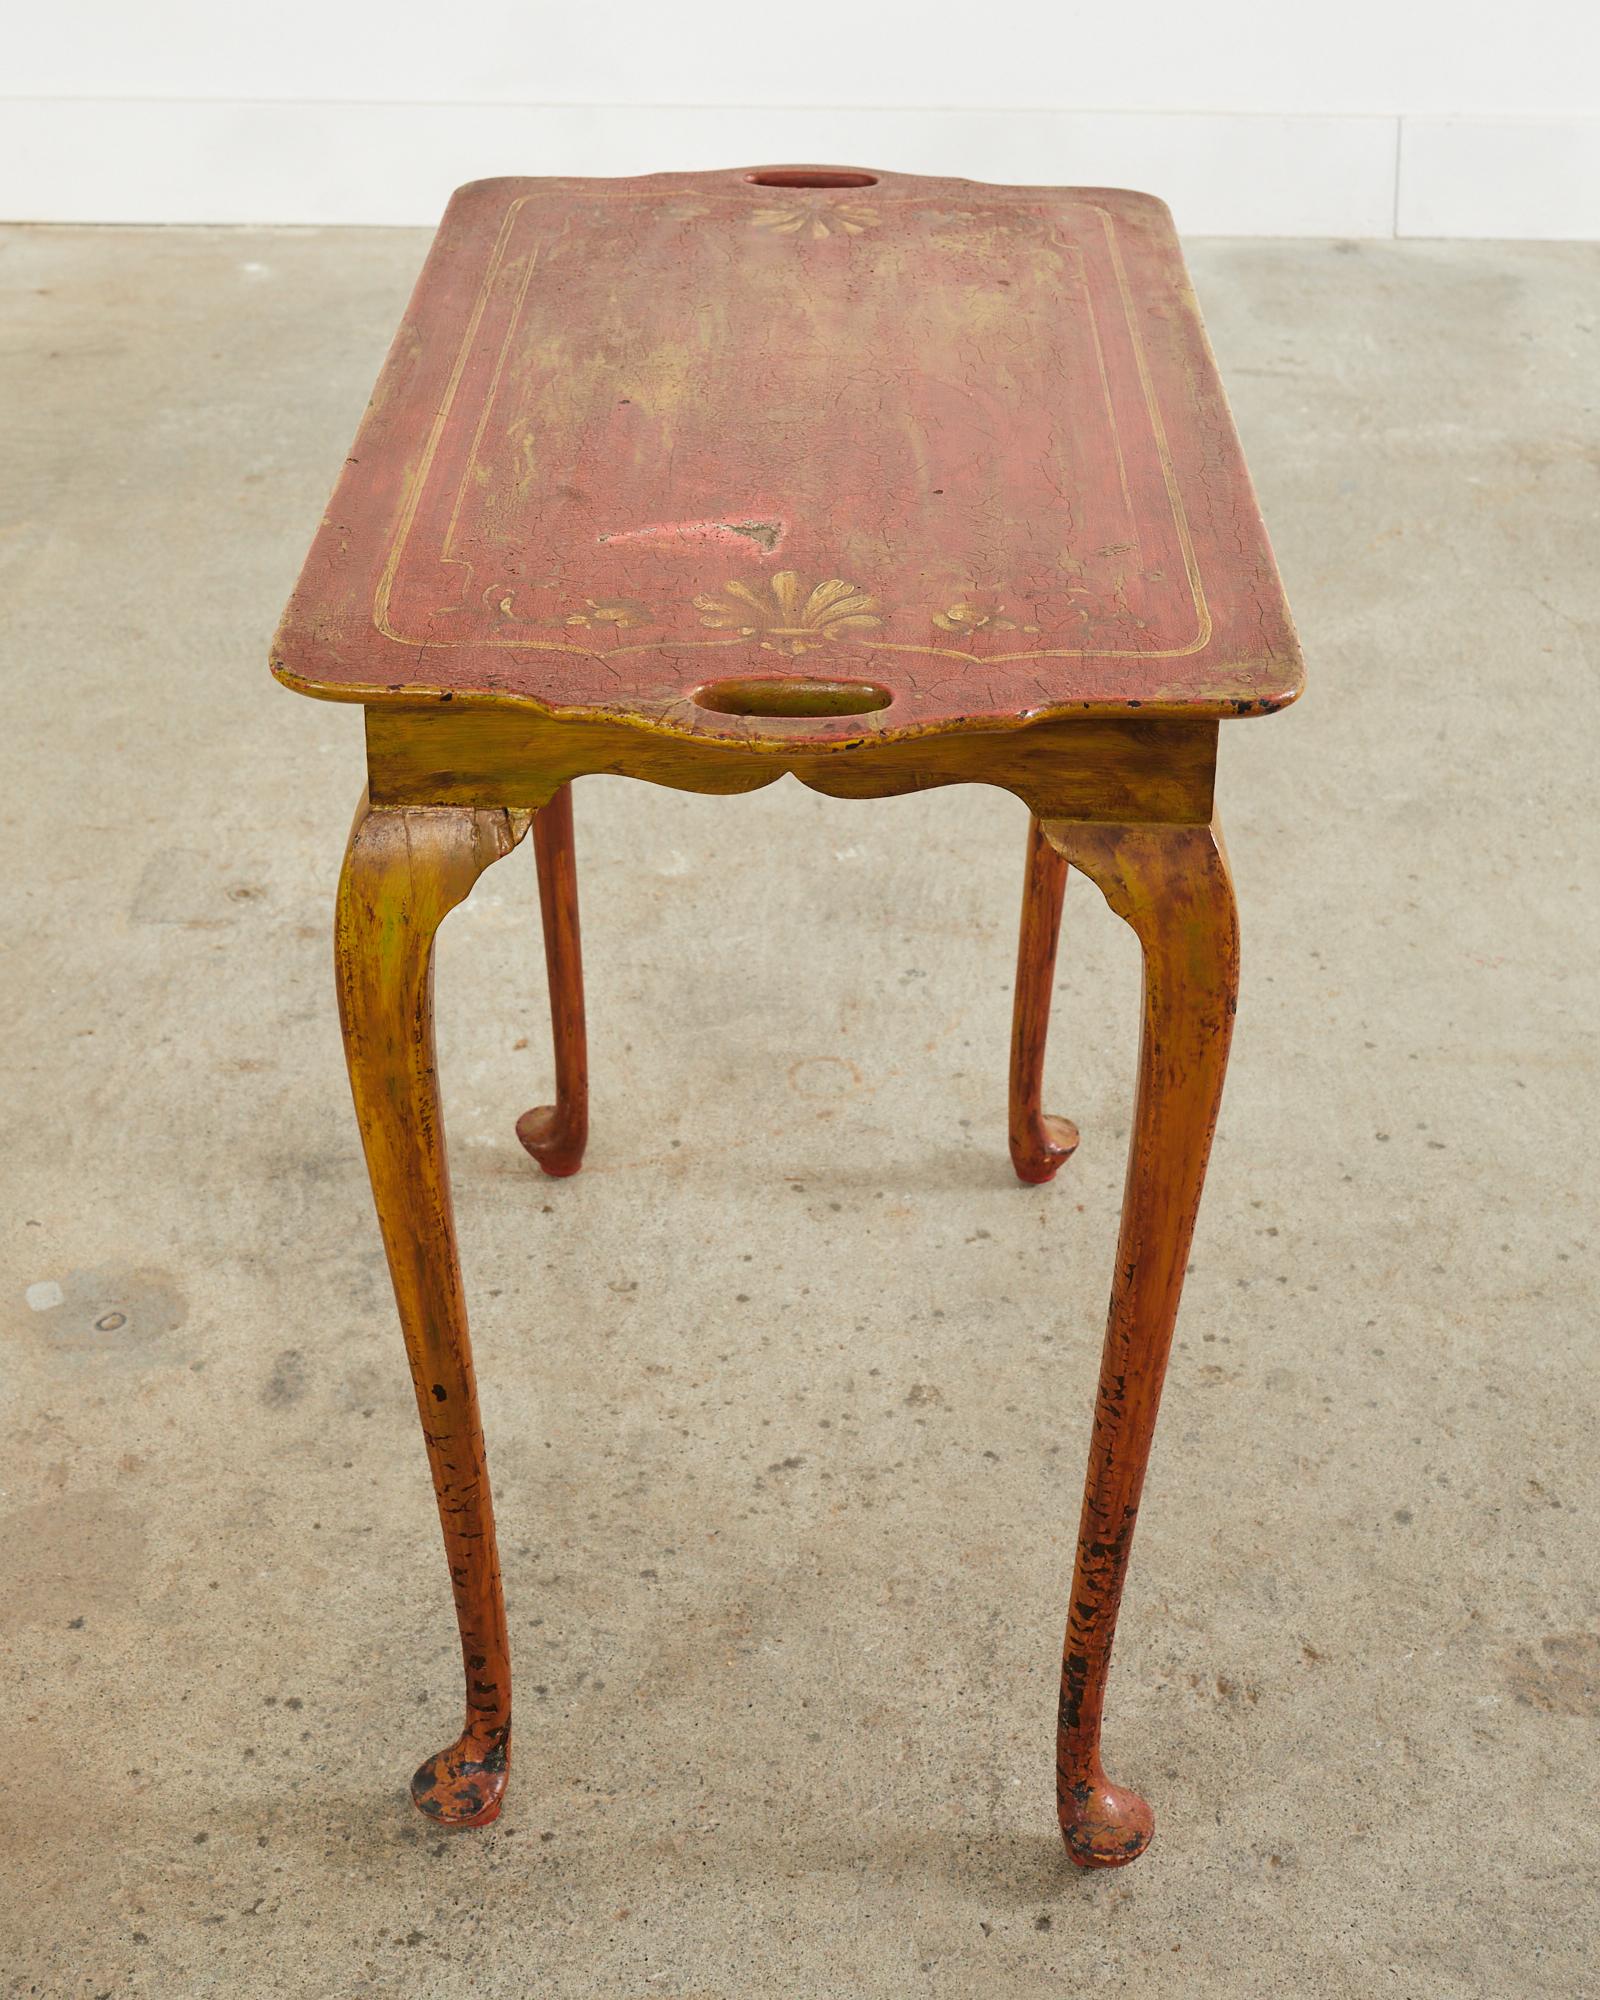 19th Century Queen Anne Style Tray Table Lacquered by Ira Yeager In Distressed Condition For Sale In Rio Vista, CA